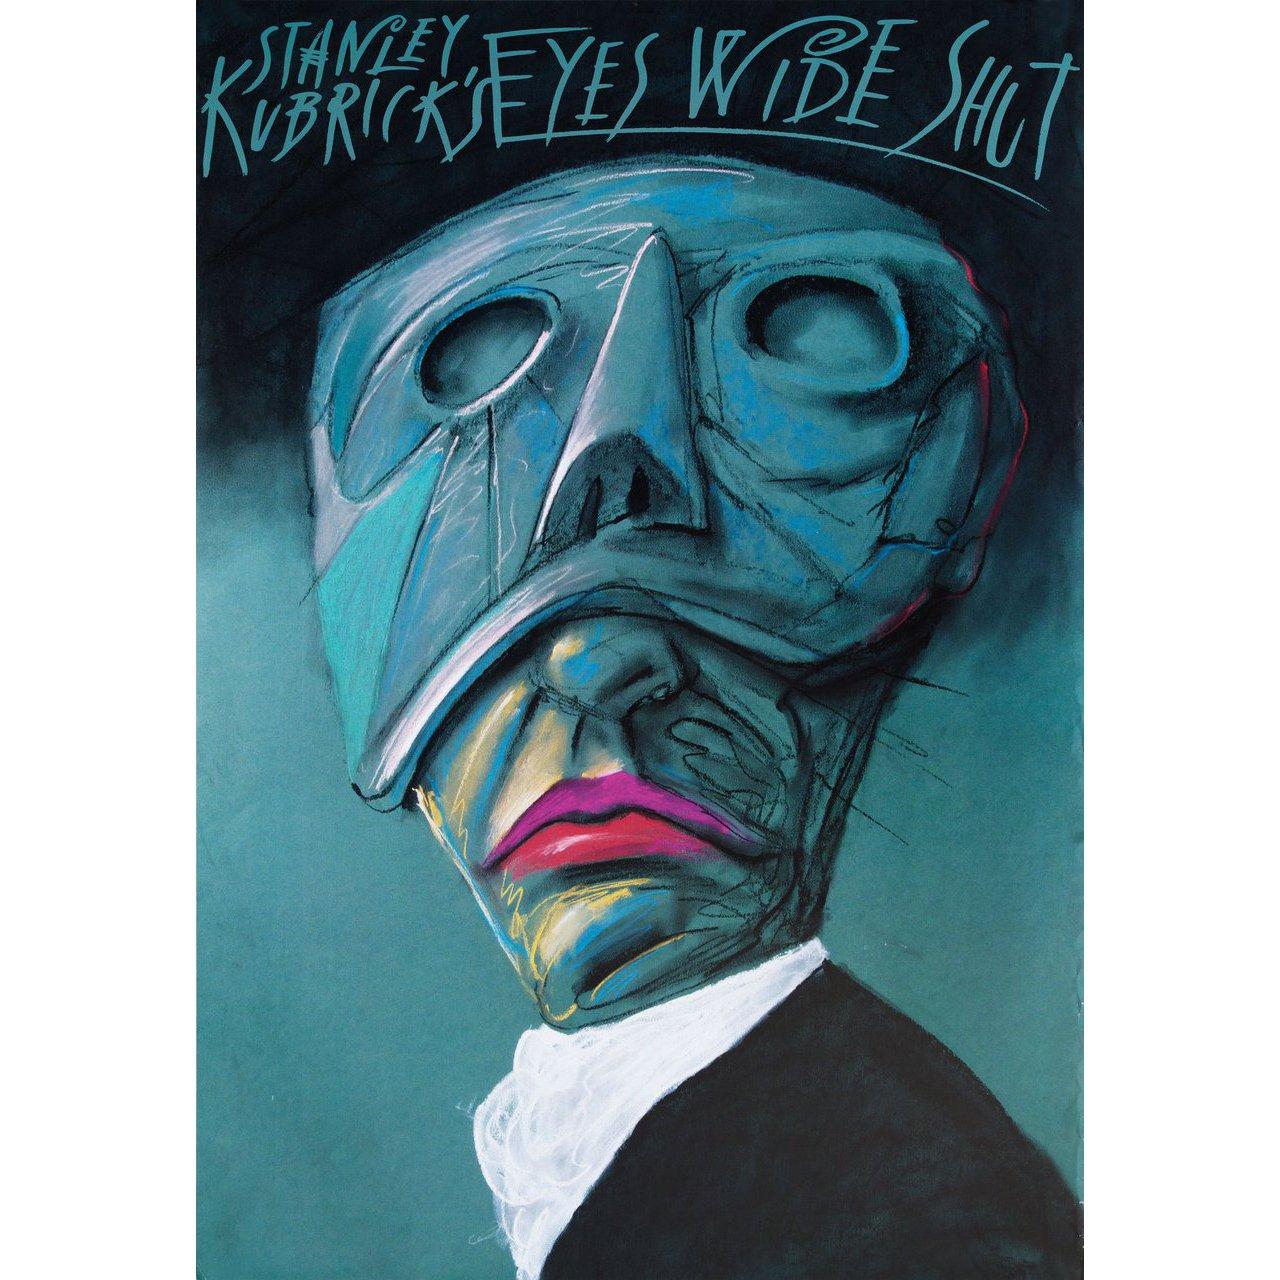 Original 1999 Polish B1 poster by Leszek Zebrowski for the film Eyes Wide Shut directed by Stanley Kubrick with Tom Cruise / Nicole Kidman / Madison Eginton / Jackie Sawiris. Very Good condition, rolled w/ 2 inch tear at bottom left. Please note: